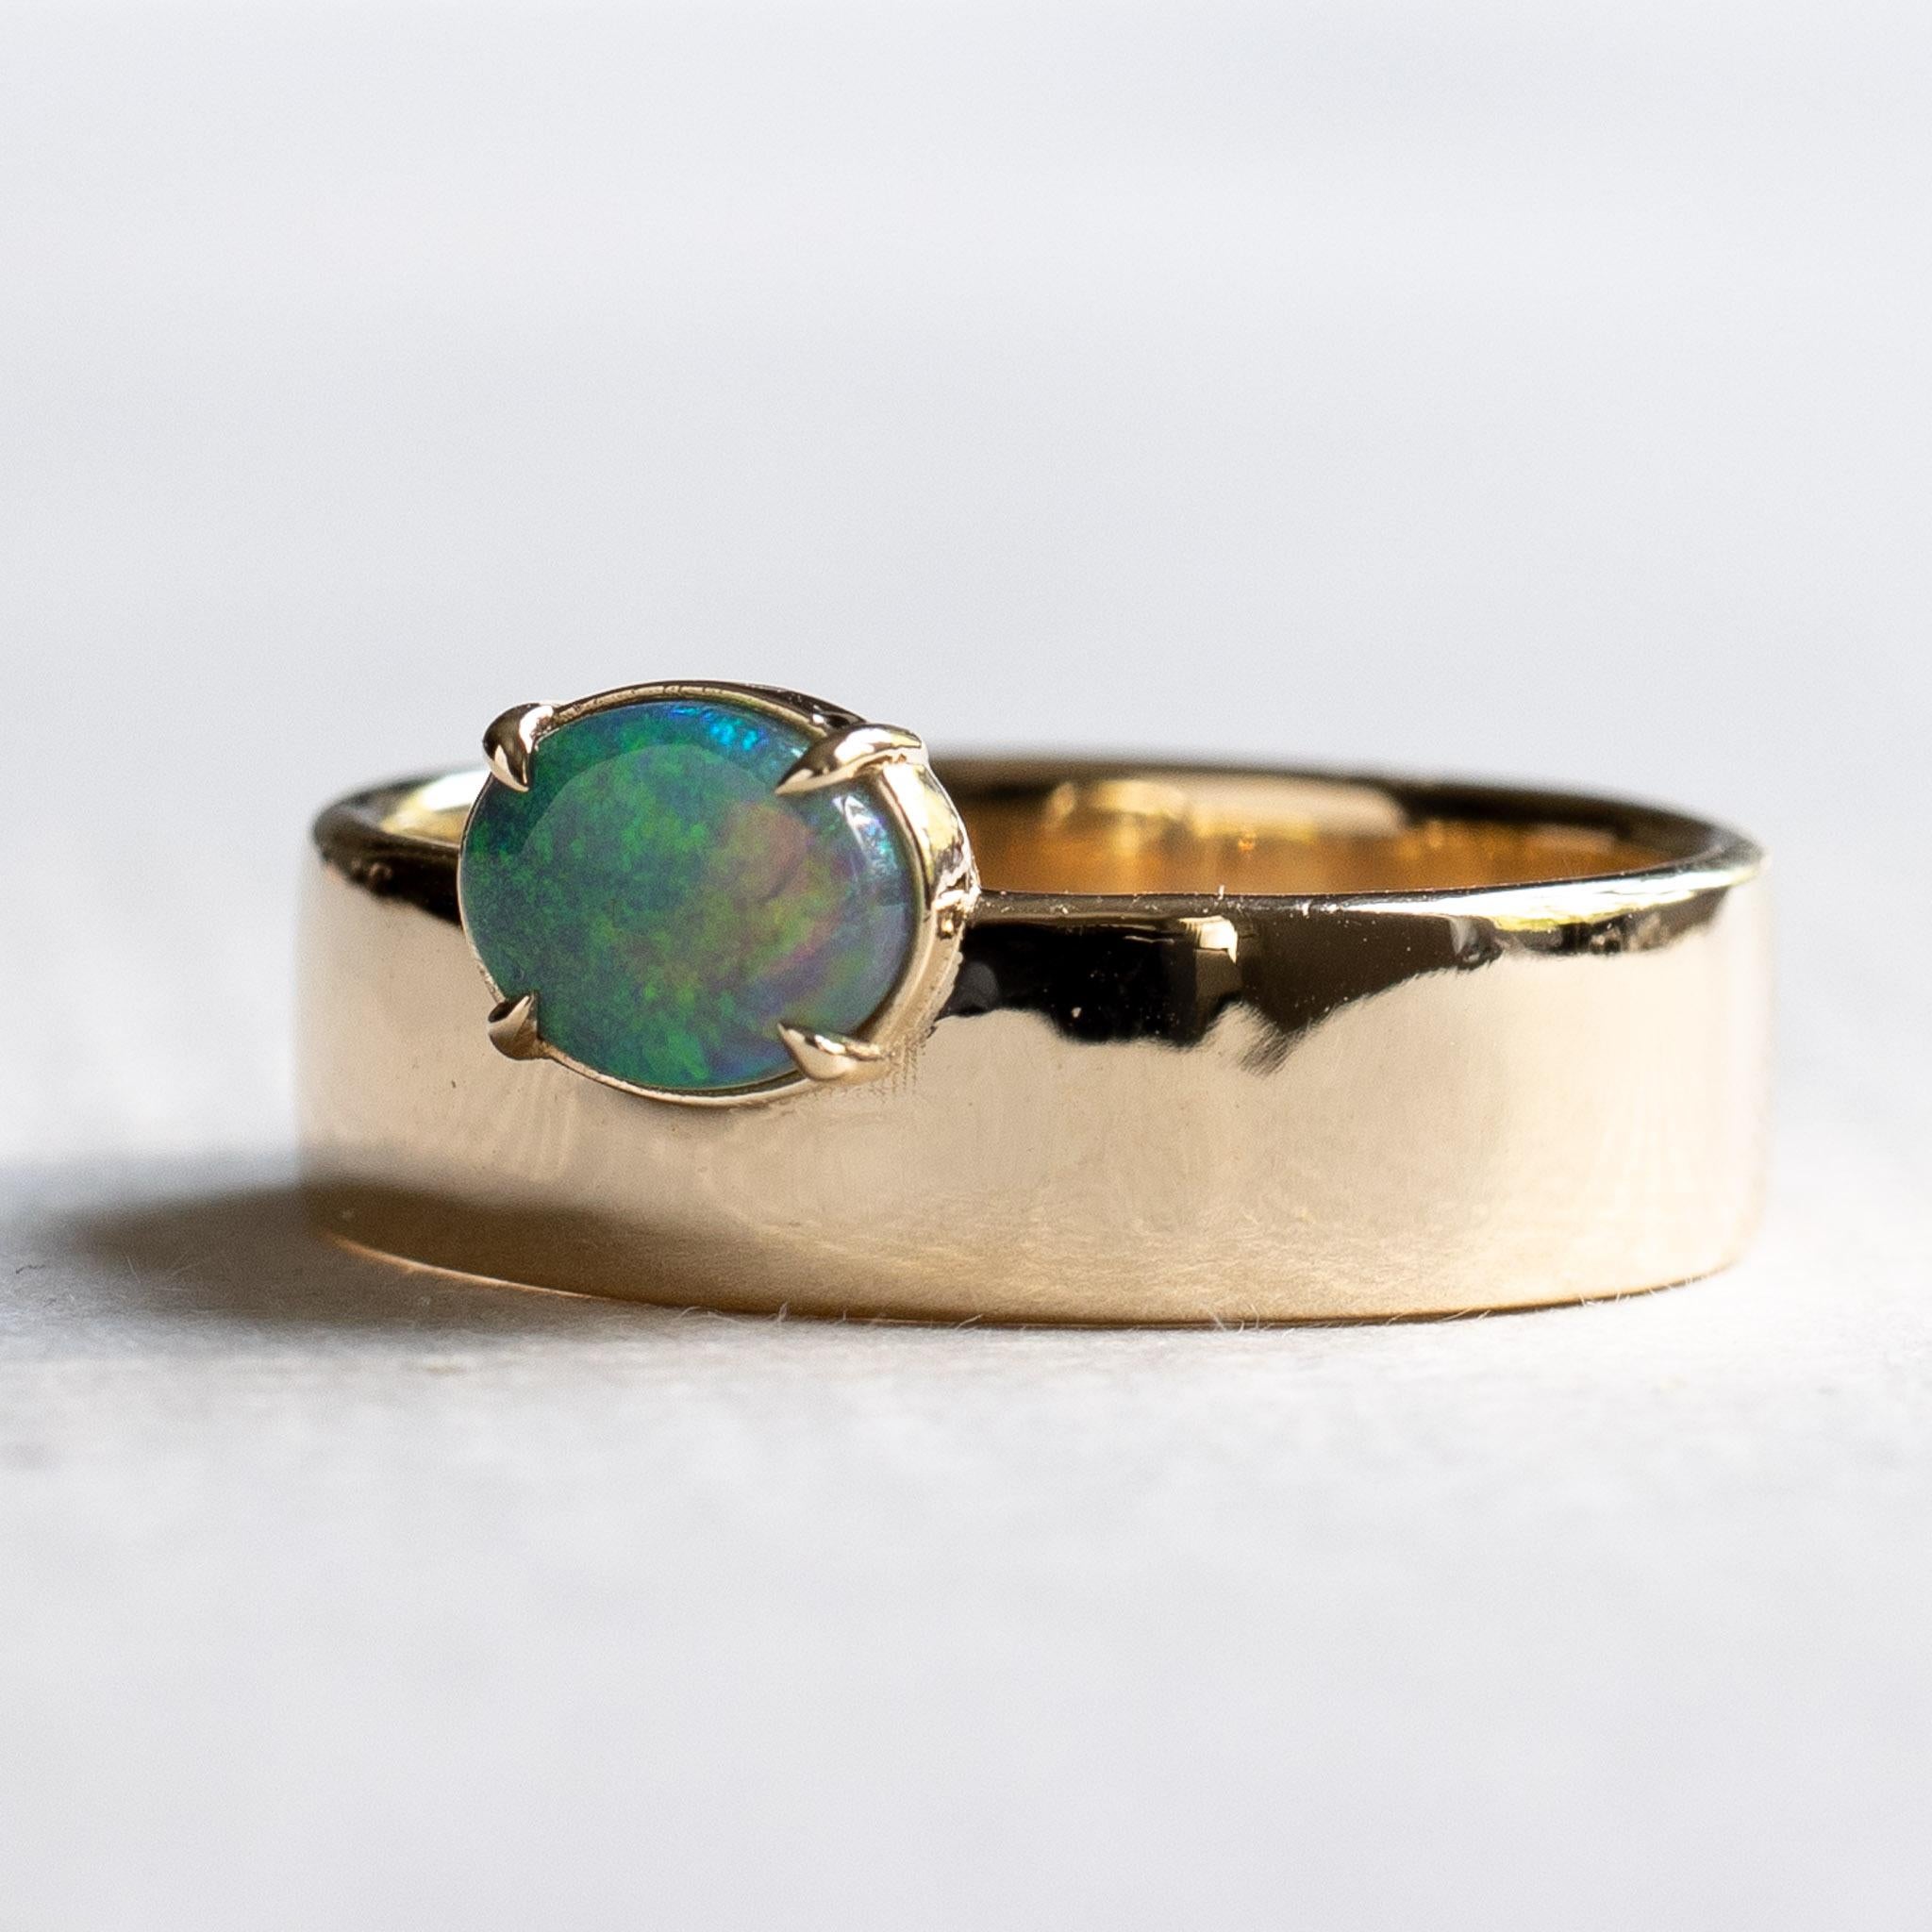 Off-set east west oval opal ring set on 14k yellow gold band. 

Metal: 14K Yellow Gold
Stone: Australian Opal
Stone Shape: Oval 
Stone Size: 6mm x 8mm
Band Width: Approx 5.5mm x 1.25mm